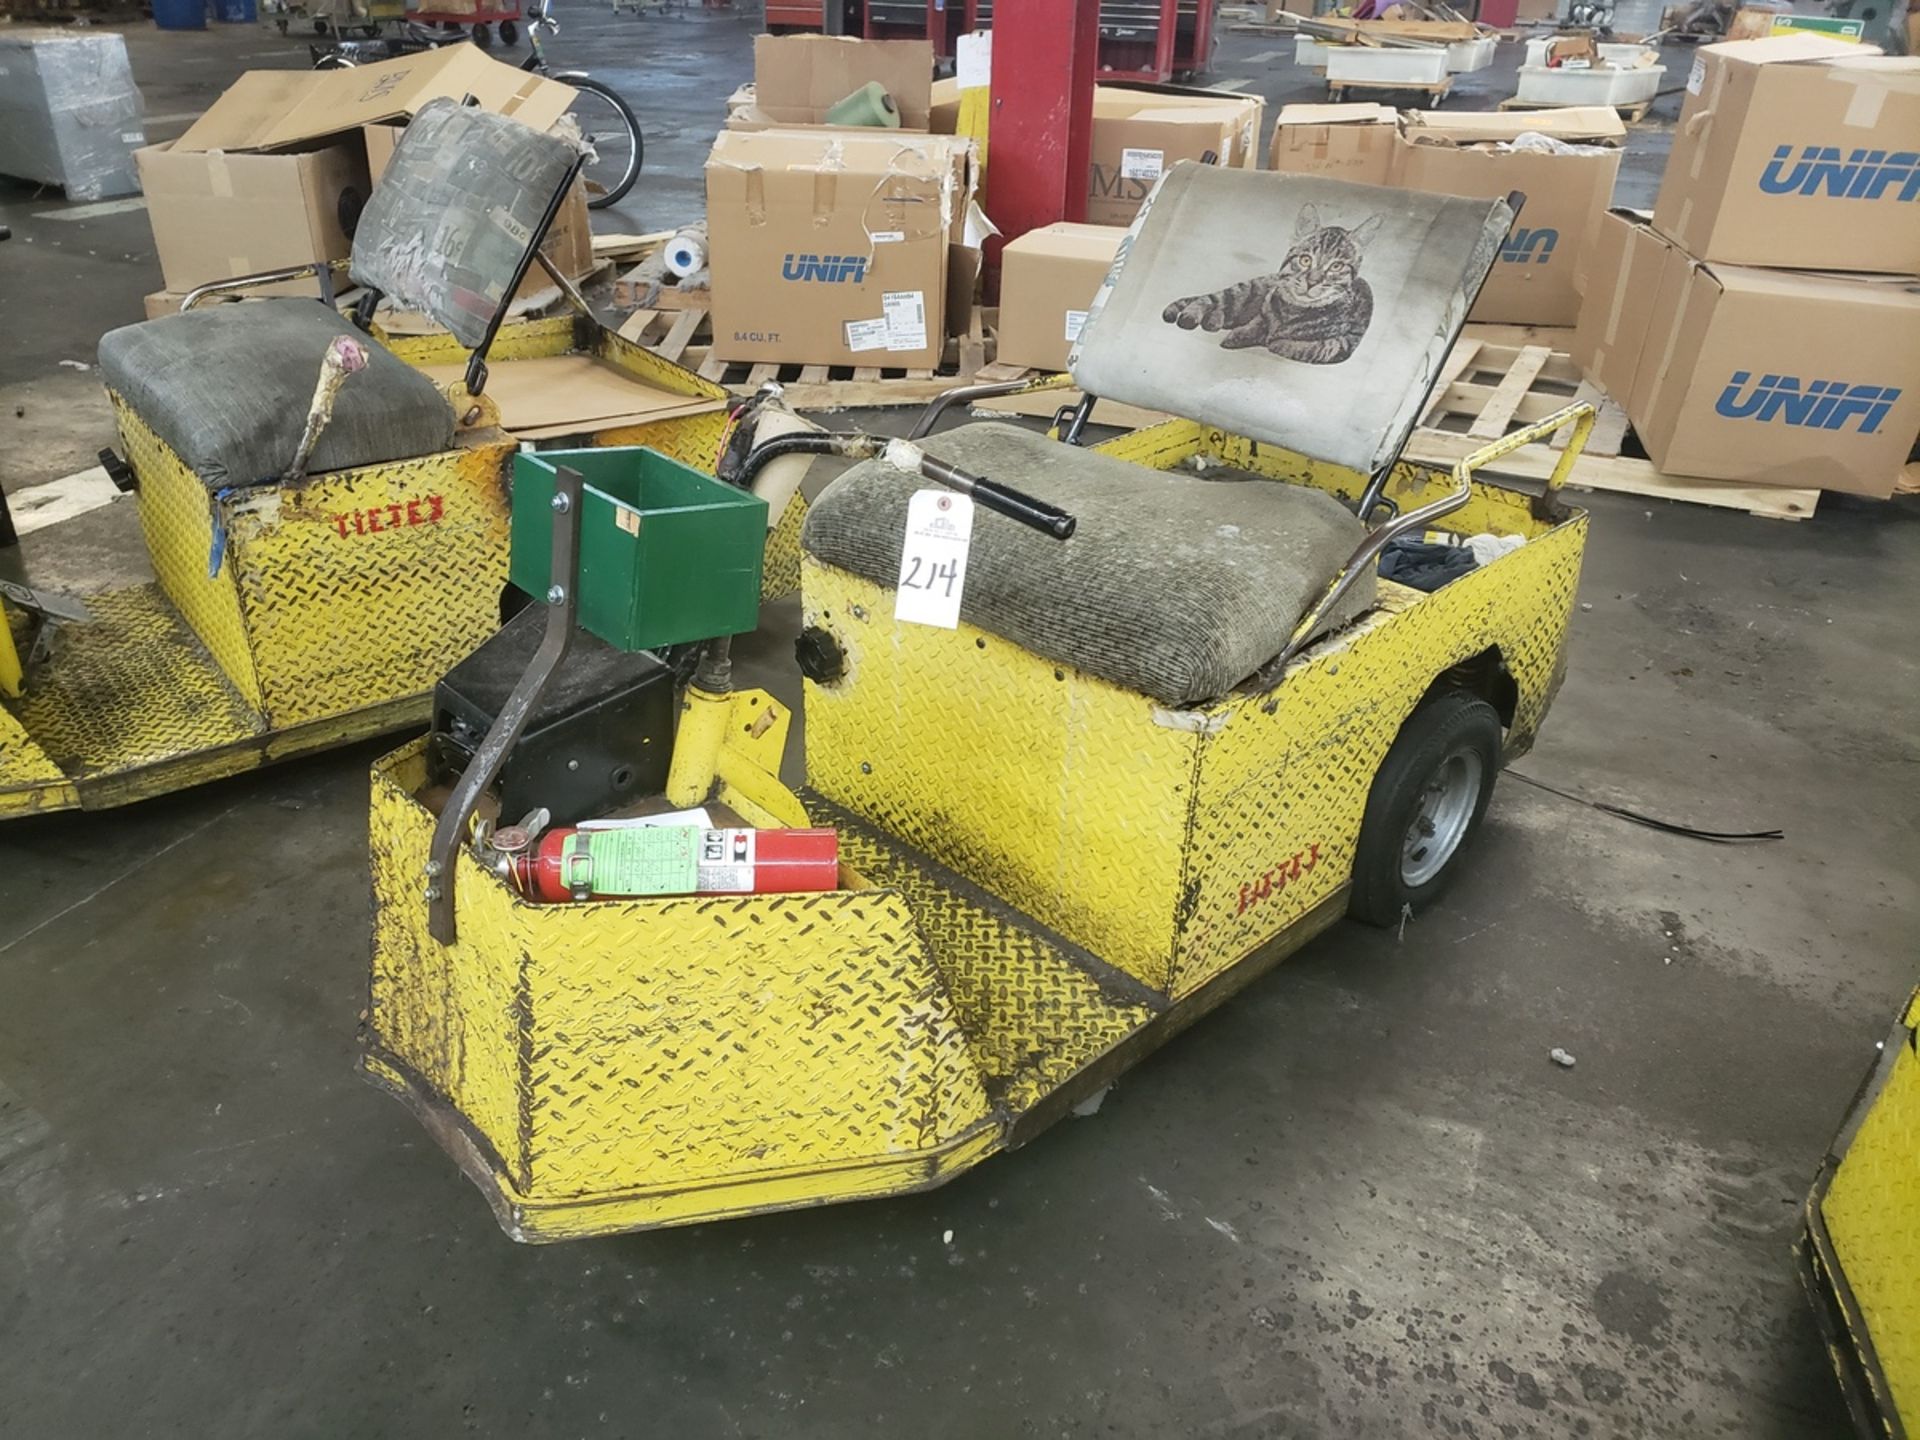 Cushman 3 Wheel Electric Shop Cart, (Out of Service) | Rig Fee: $50